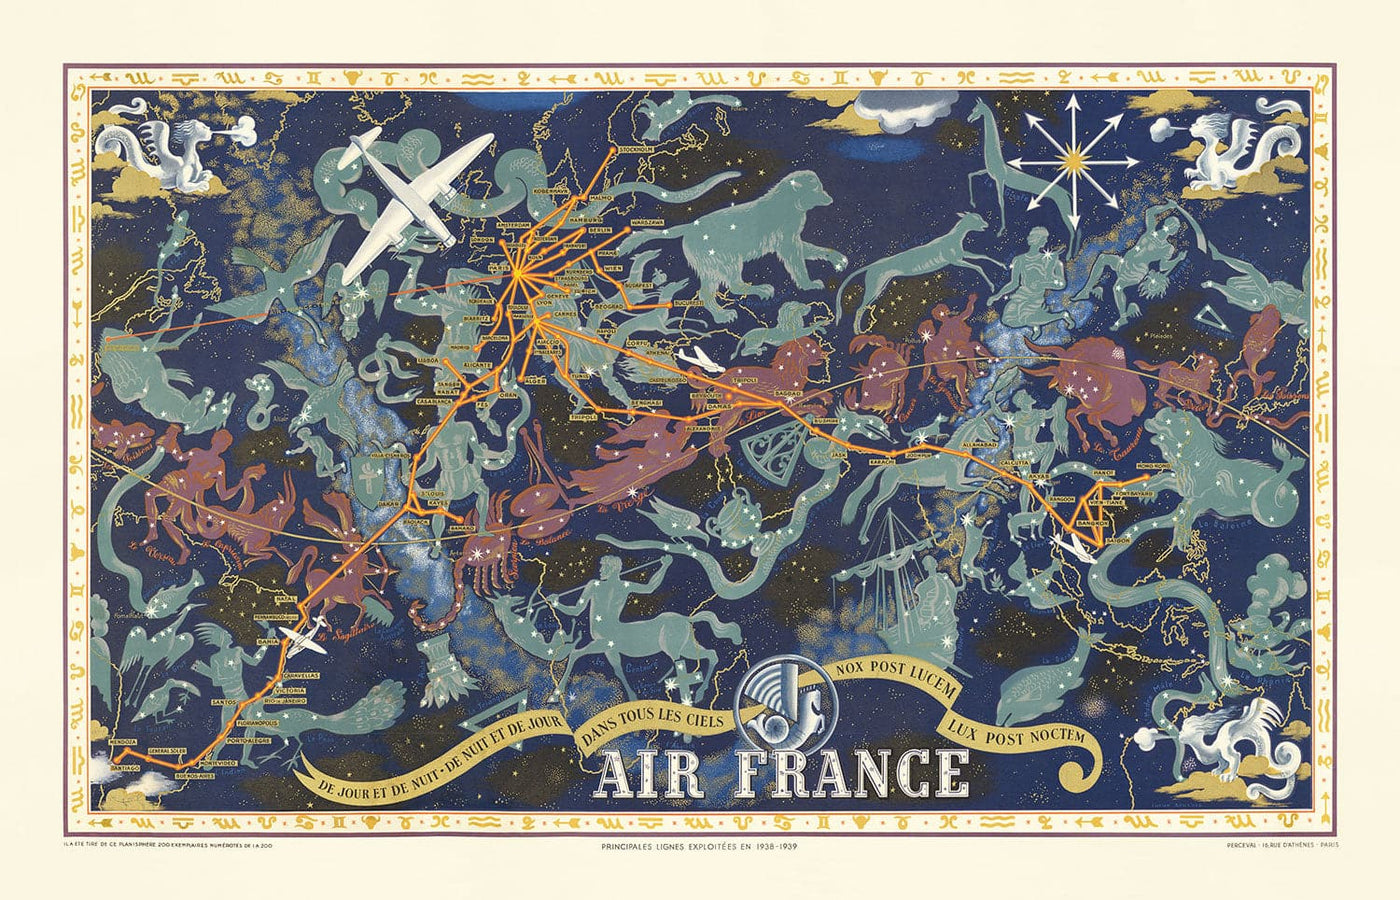 Old Air France Zodiac World Map, 1939 by Lucien Boucher - Historical Aircraft Route Celestial Wall Chart